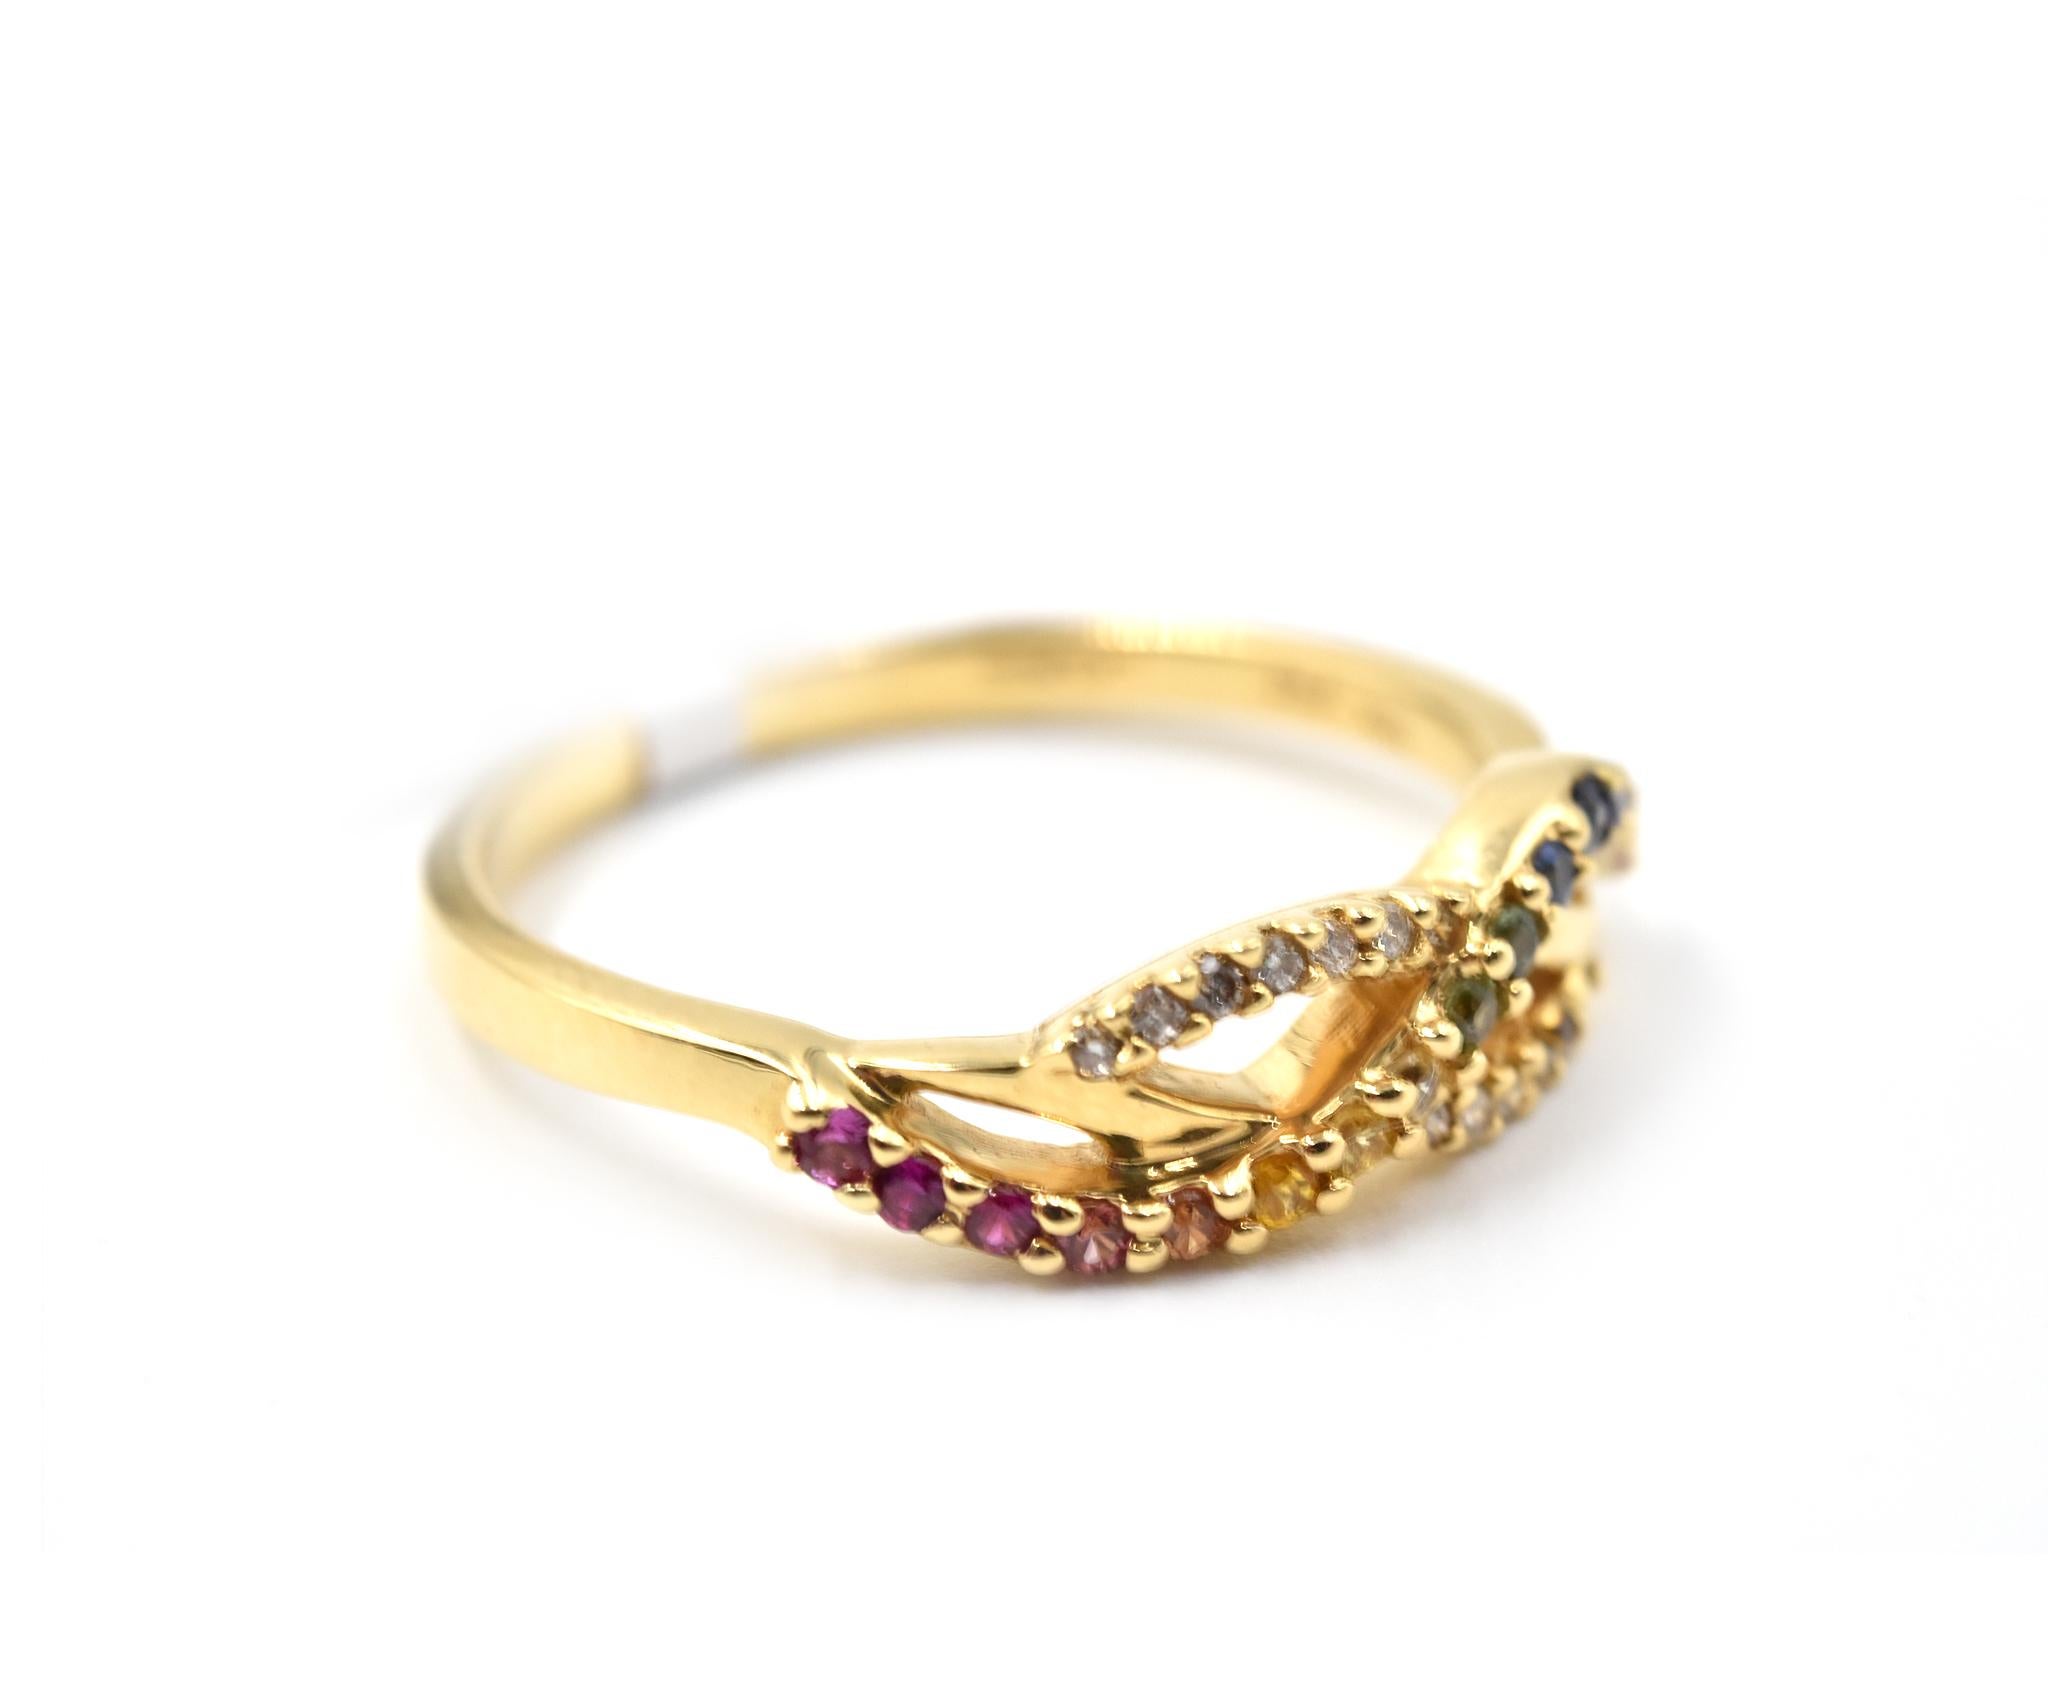 Designer: custom design
Material: 14k yellow gold
Rainbow Sapphires: round cut 0.22 carat weight 
Diamonds: round brilliant cut 0.06 carat weight
Ring Size: 8 1/2 (please allow two additional shipping days for sizing requests)
Weight: 3.46 grams
